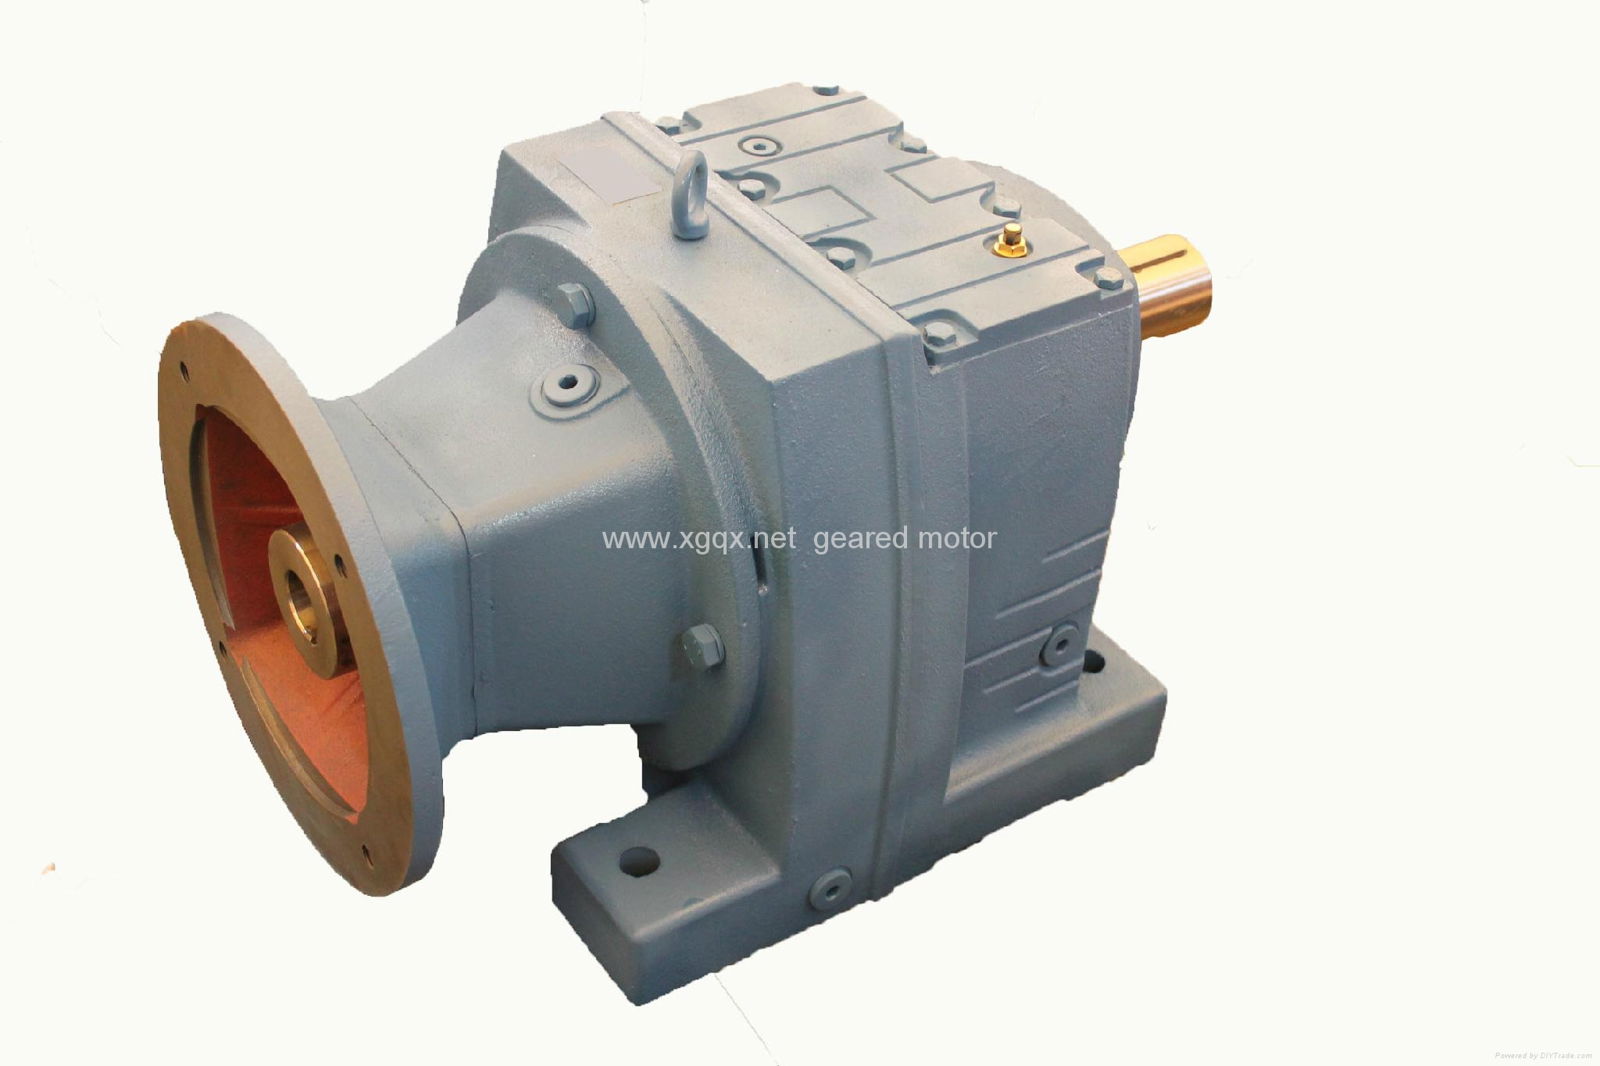 R series of helical geared motor 5